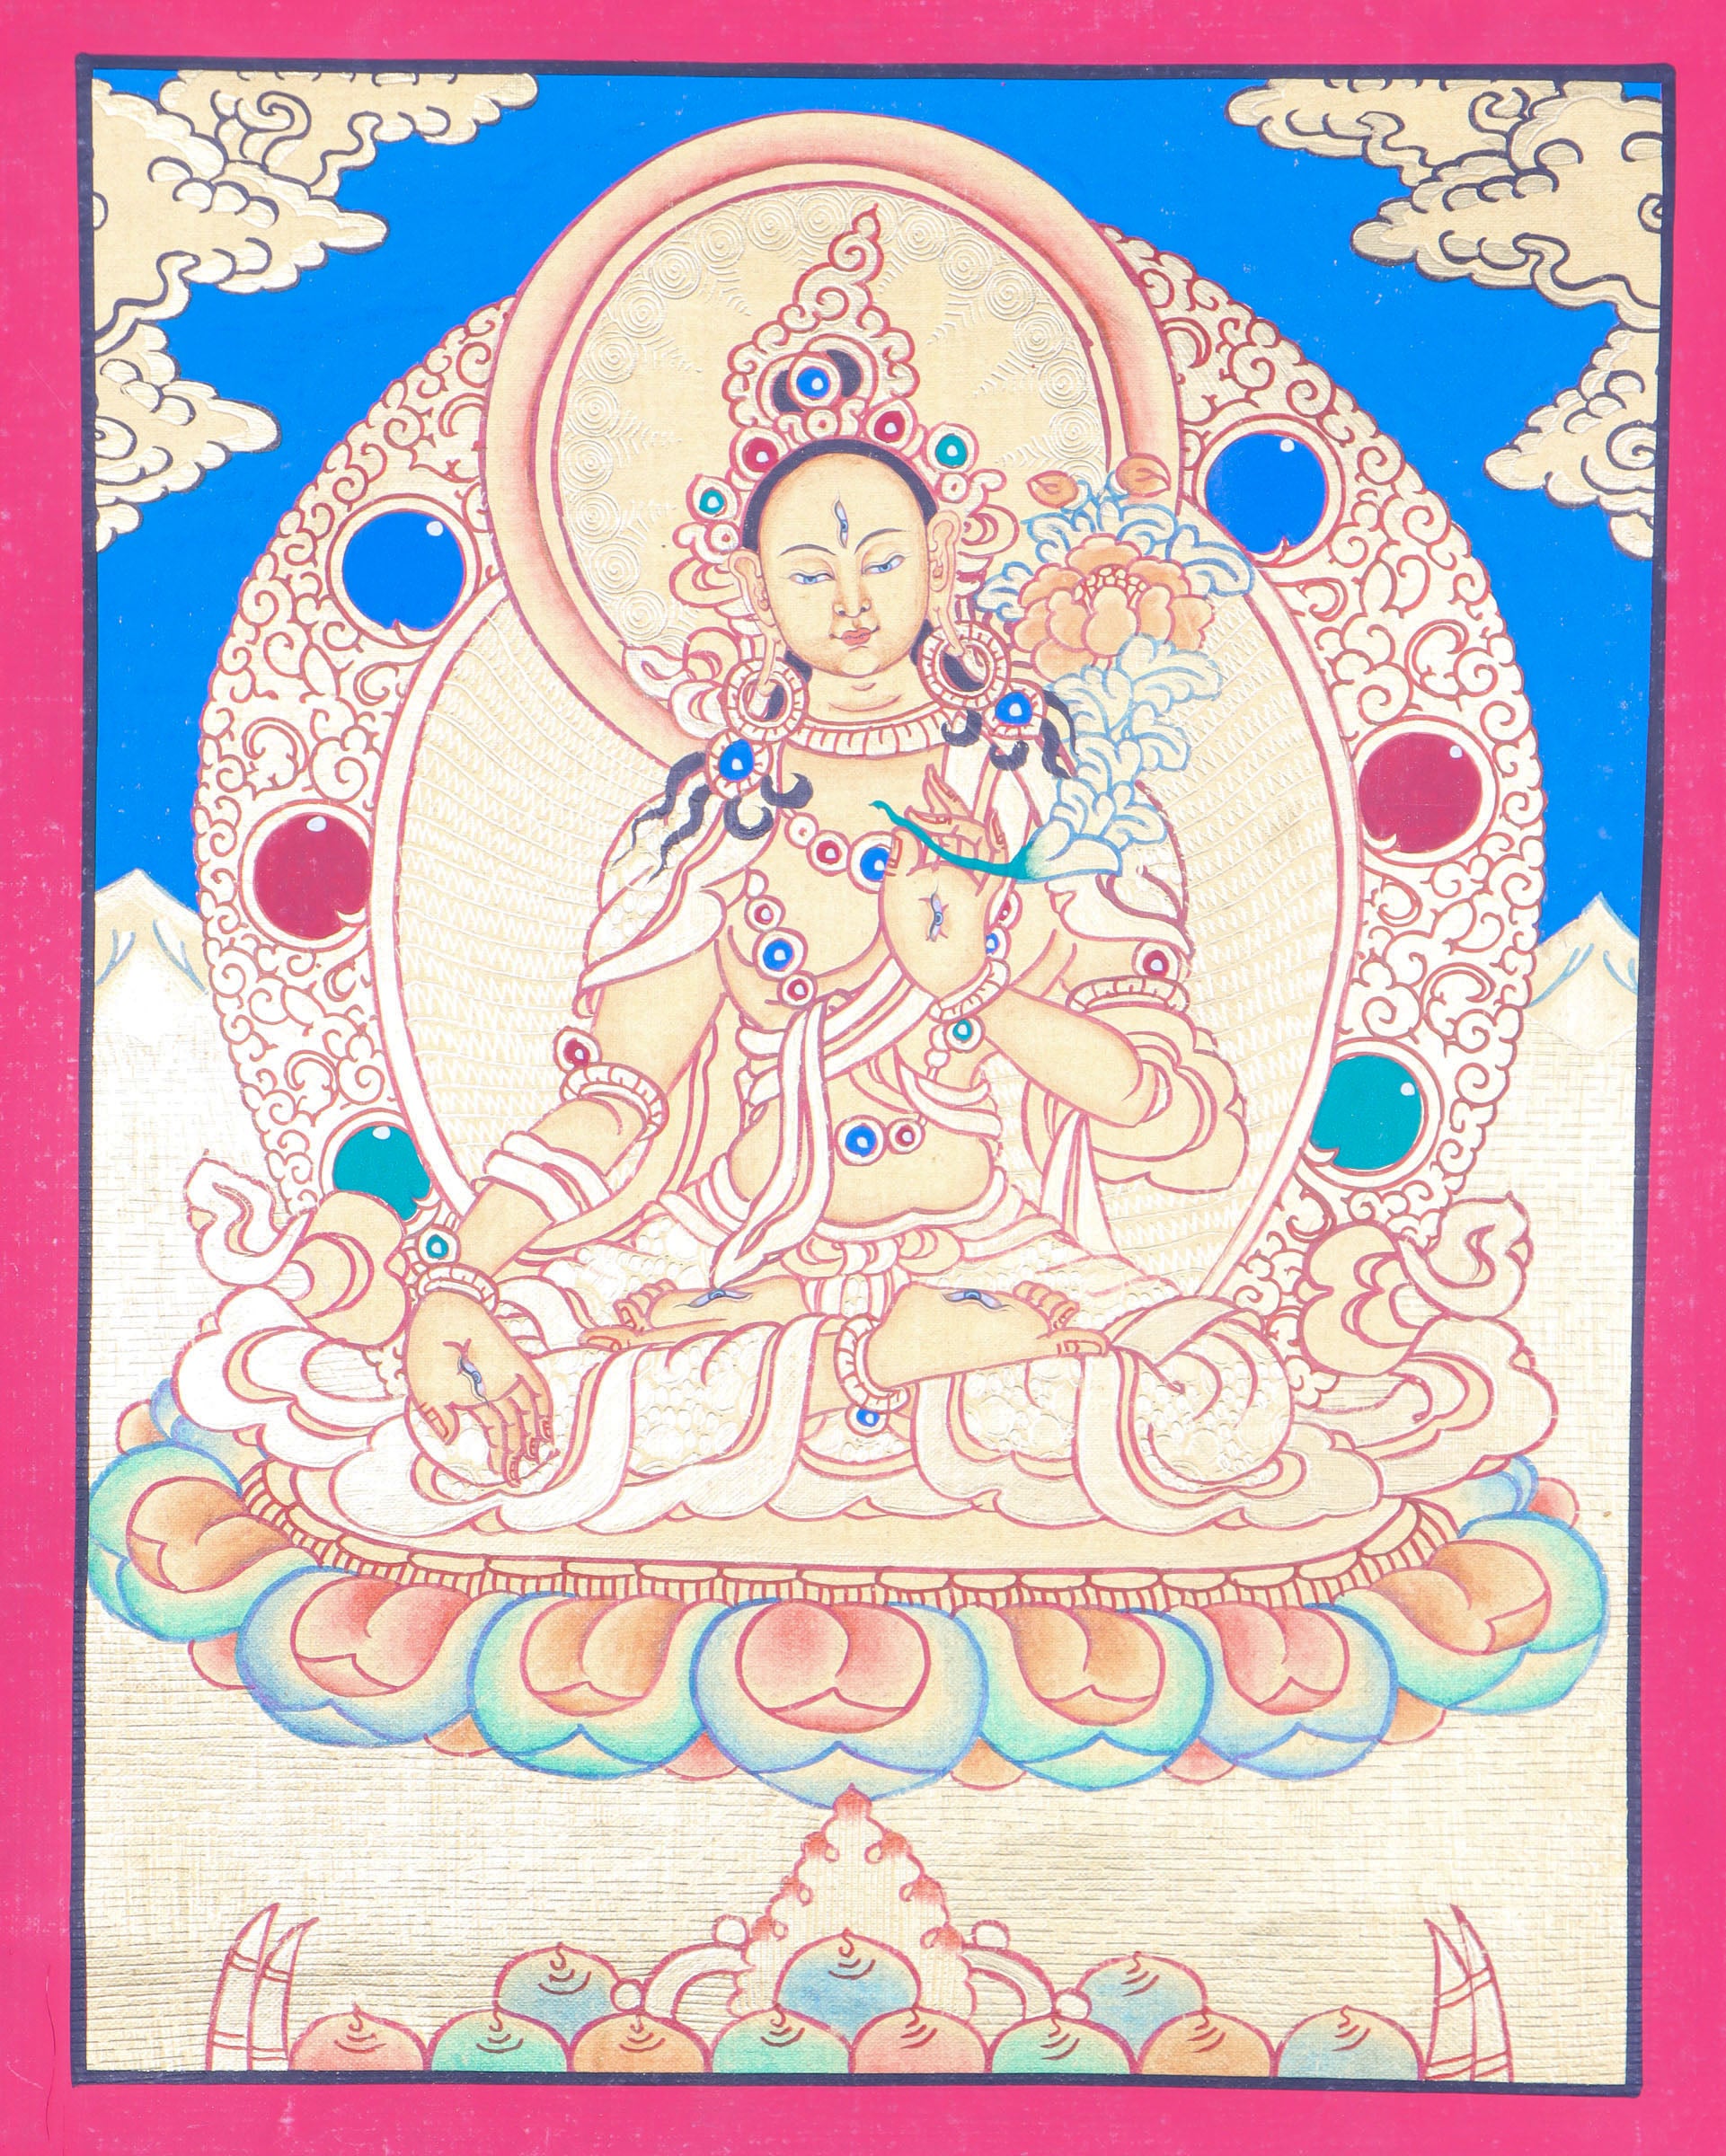  White Tara Thangka Painting is an ideal tool for meditative reflection.